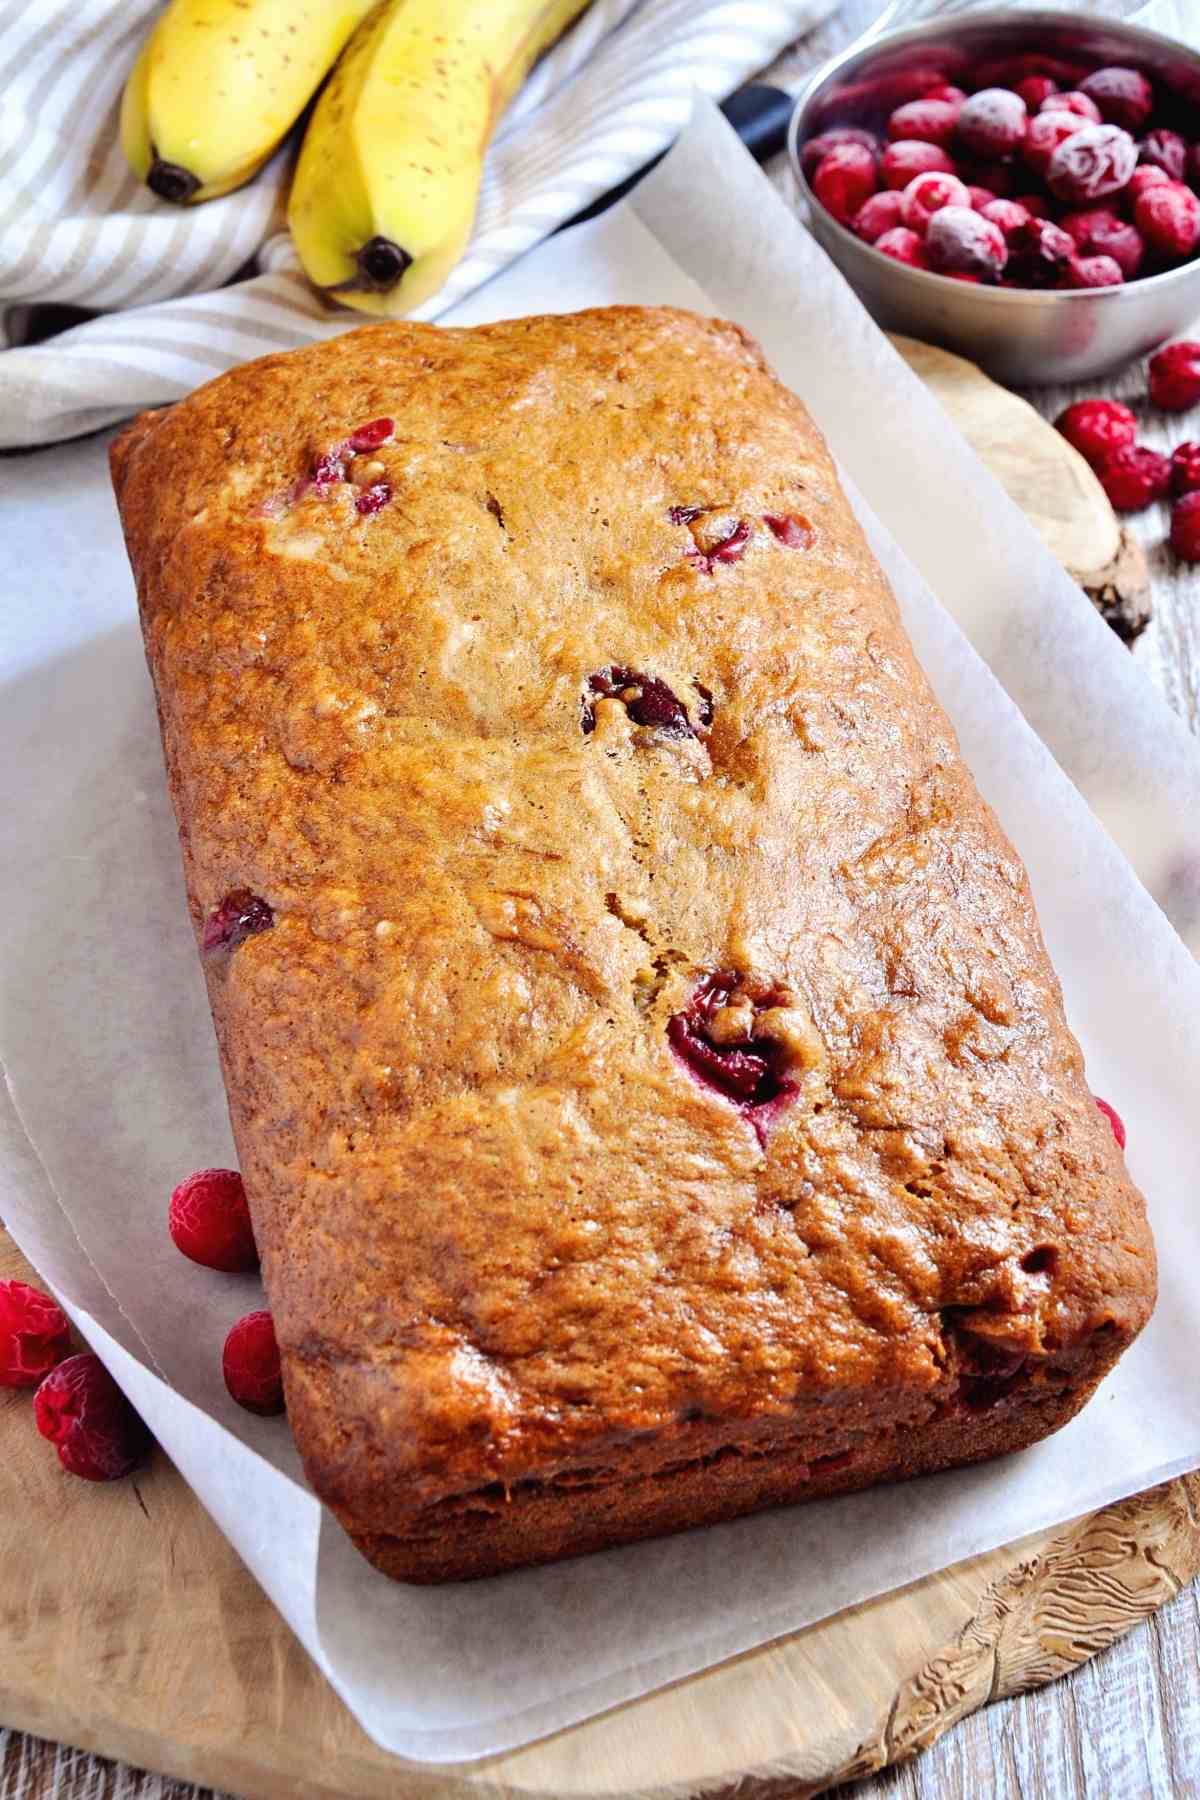 The tart flavor of fresh cranberries combines with creamy bananas to make this decadent Cranberry Banana Bread. Serve it to guests at your next casual get-together!